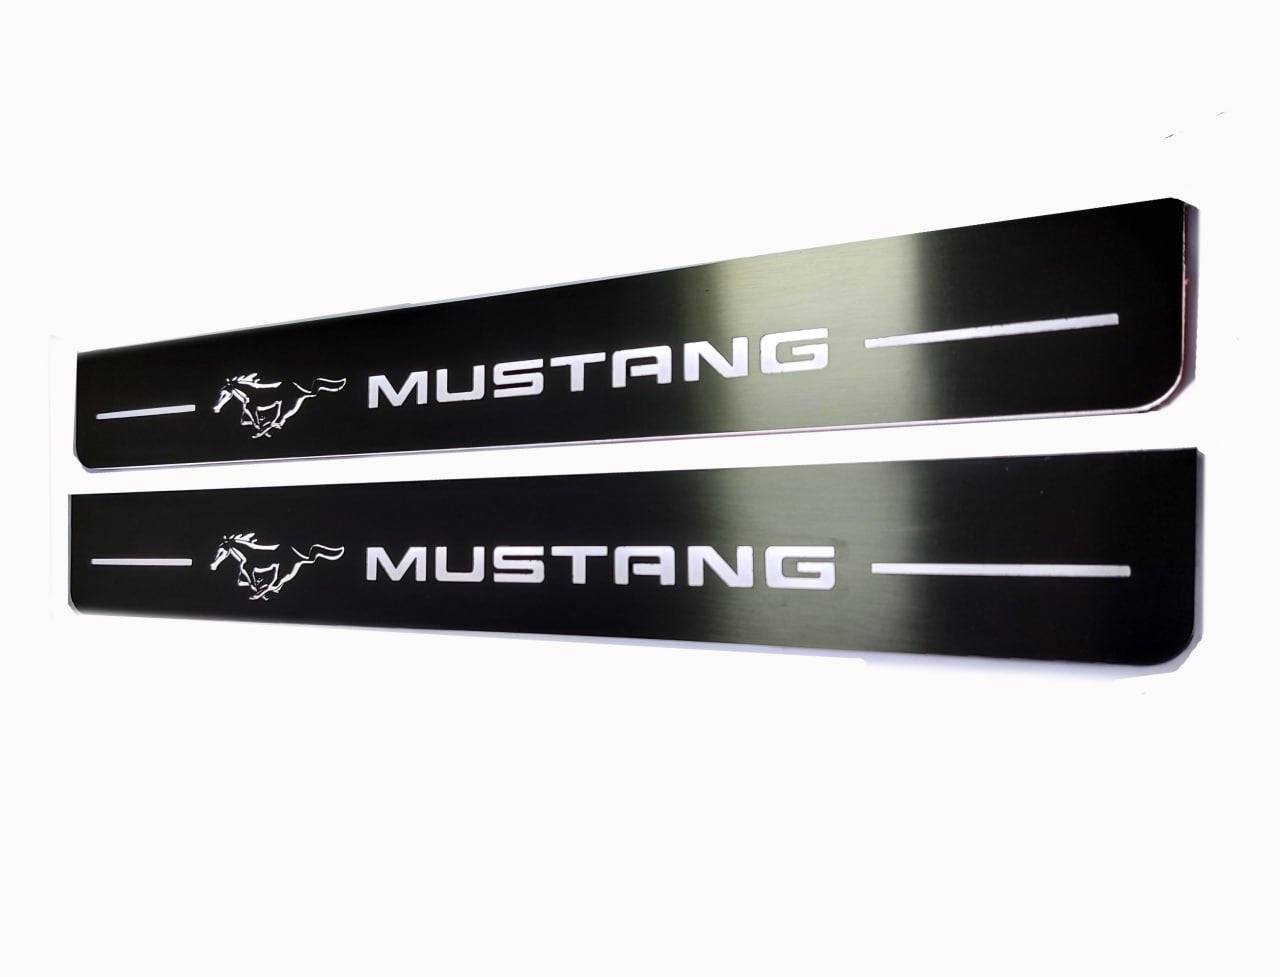 Ford Mustang VI Illuminated LED Door Sill Plates With Mustang Logo - decoinfabric